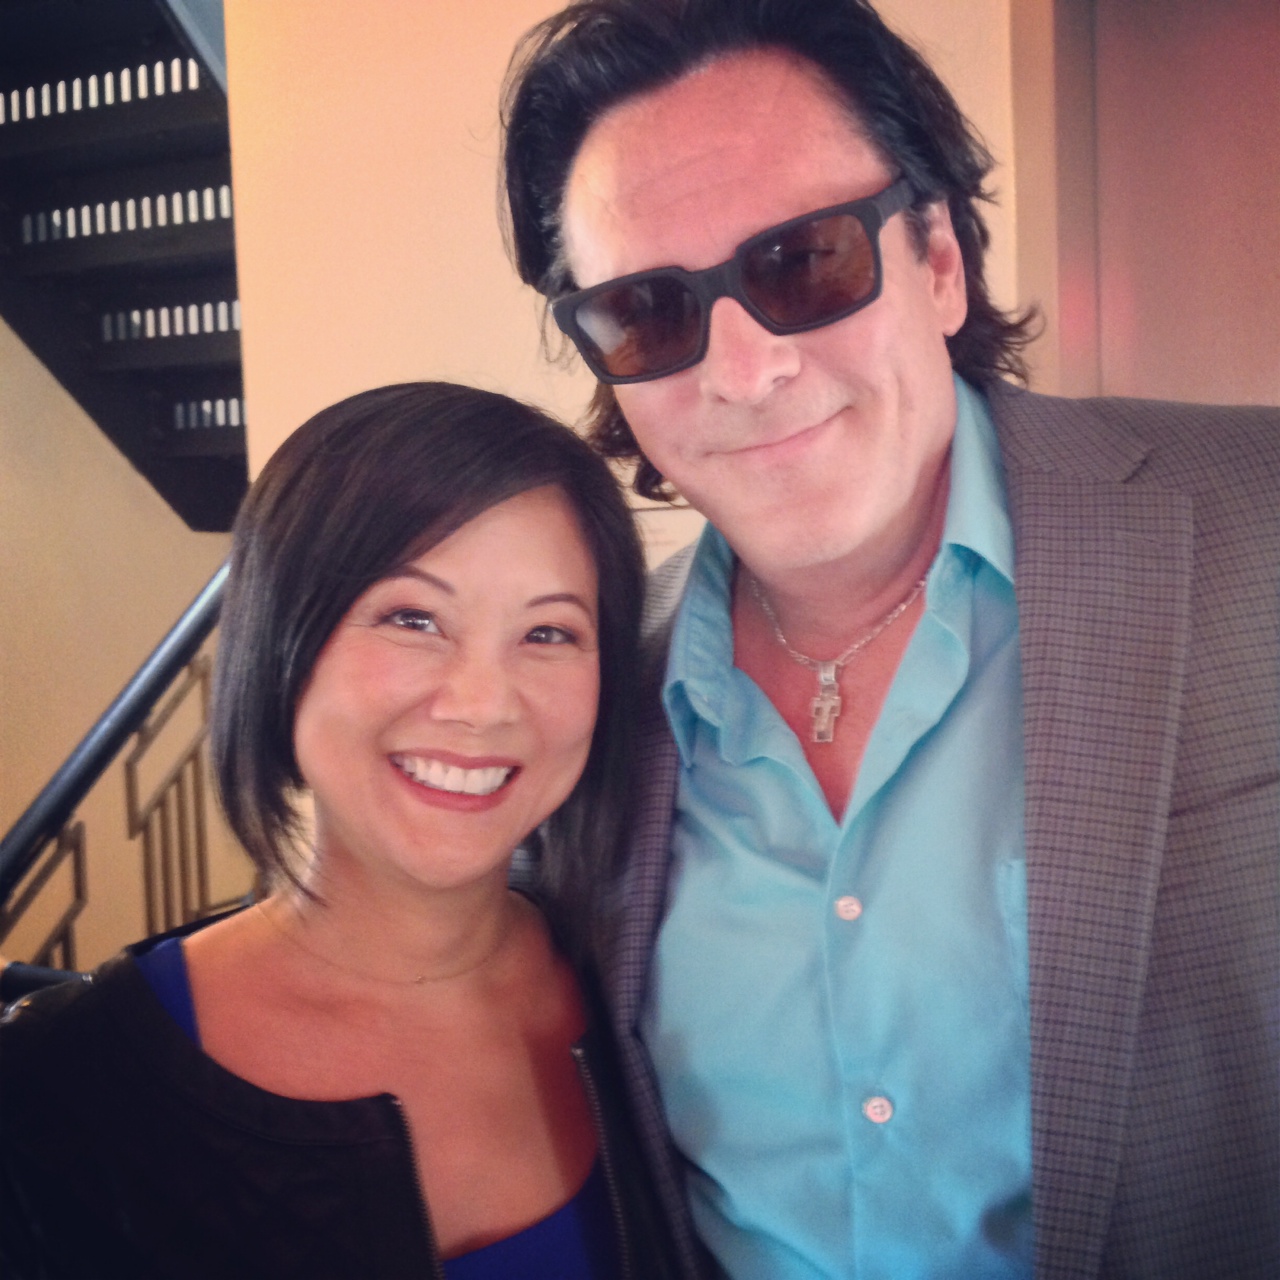 Co-star with actor Michael Madsen for the feature film, Sacred Blood, directed by Christopher Coppola.